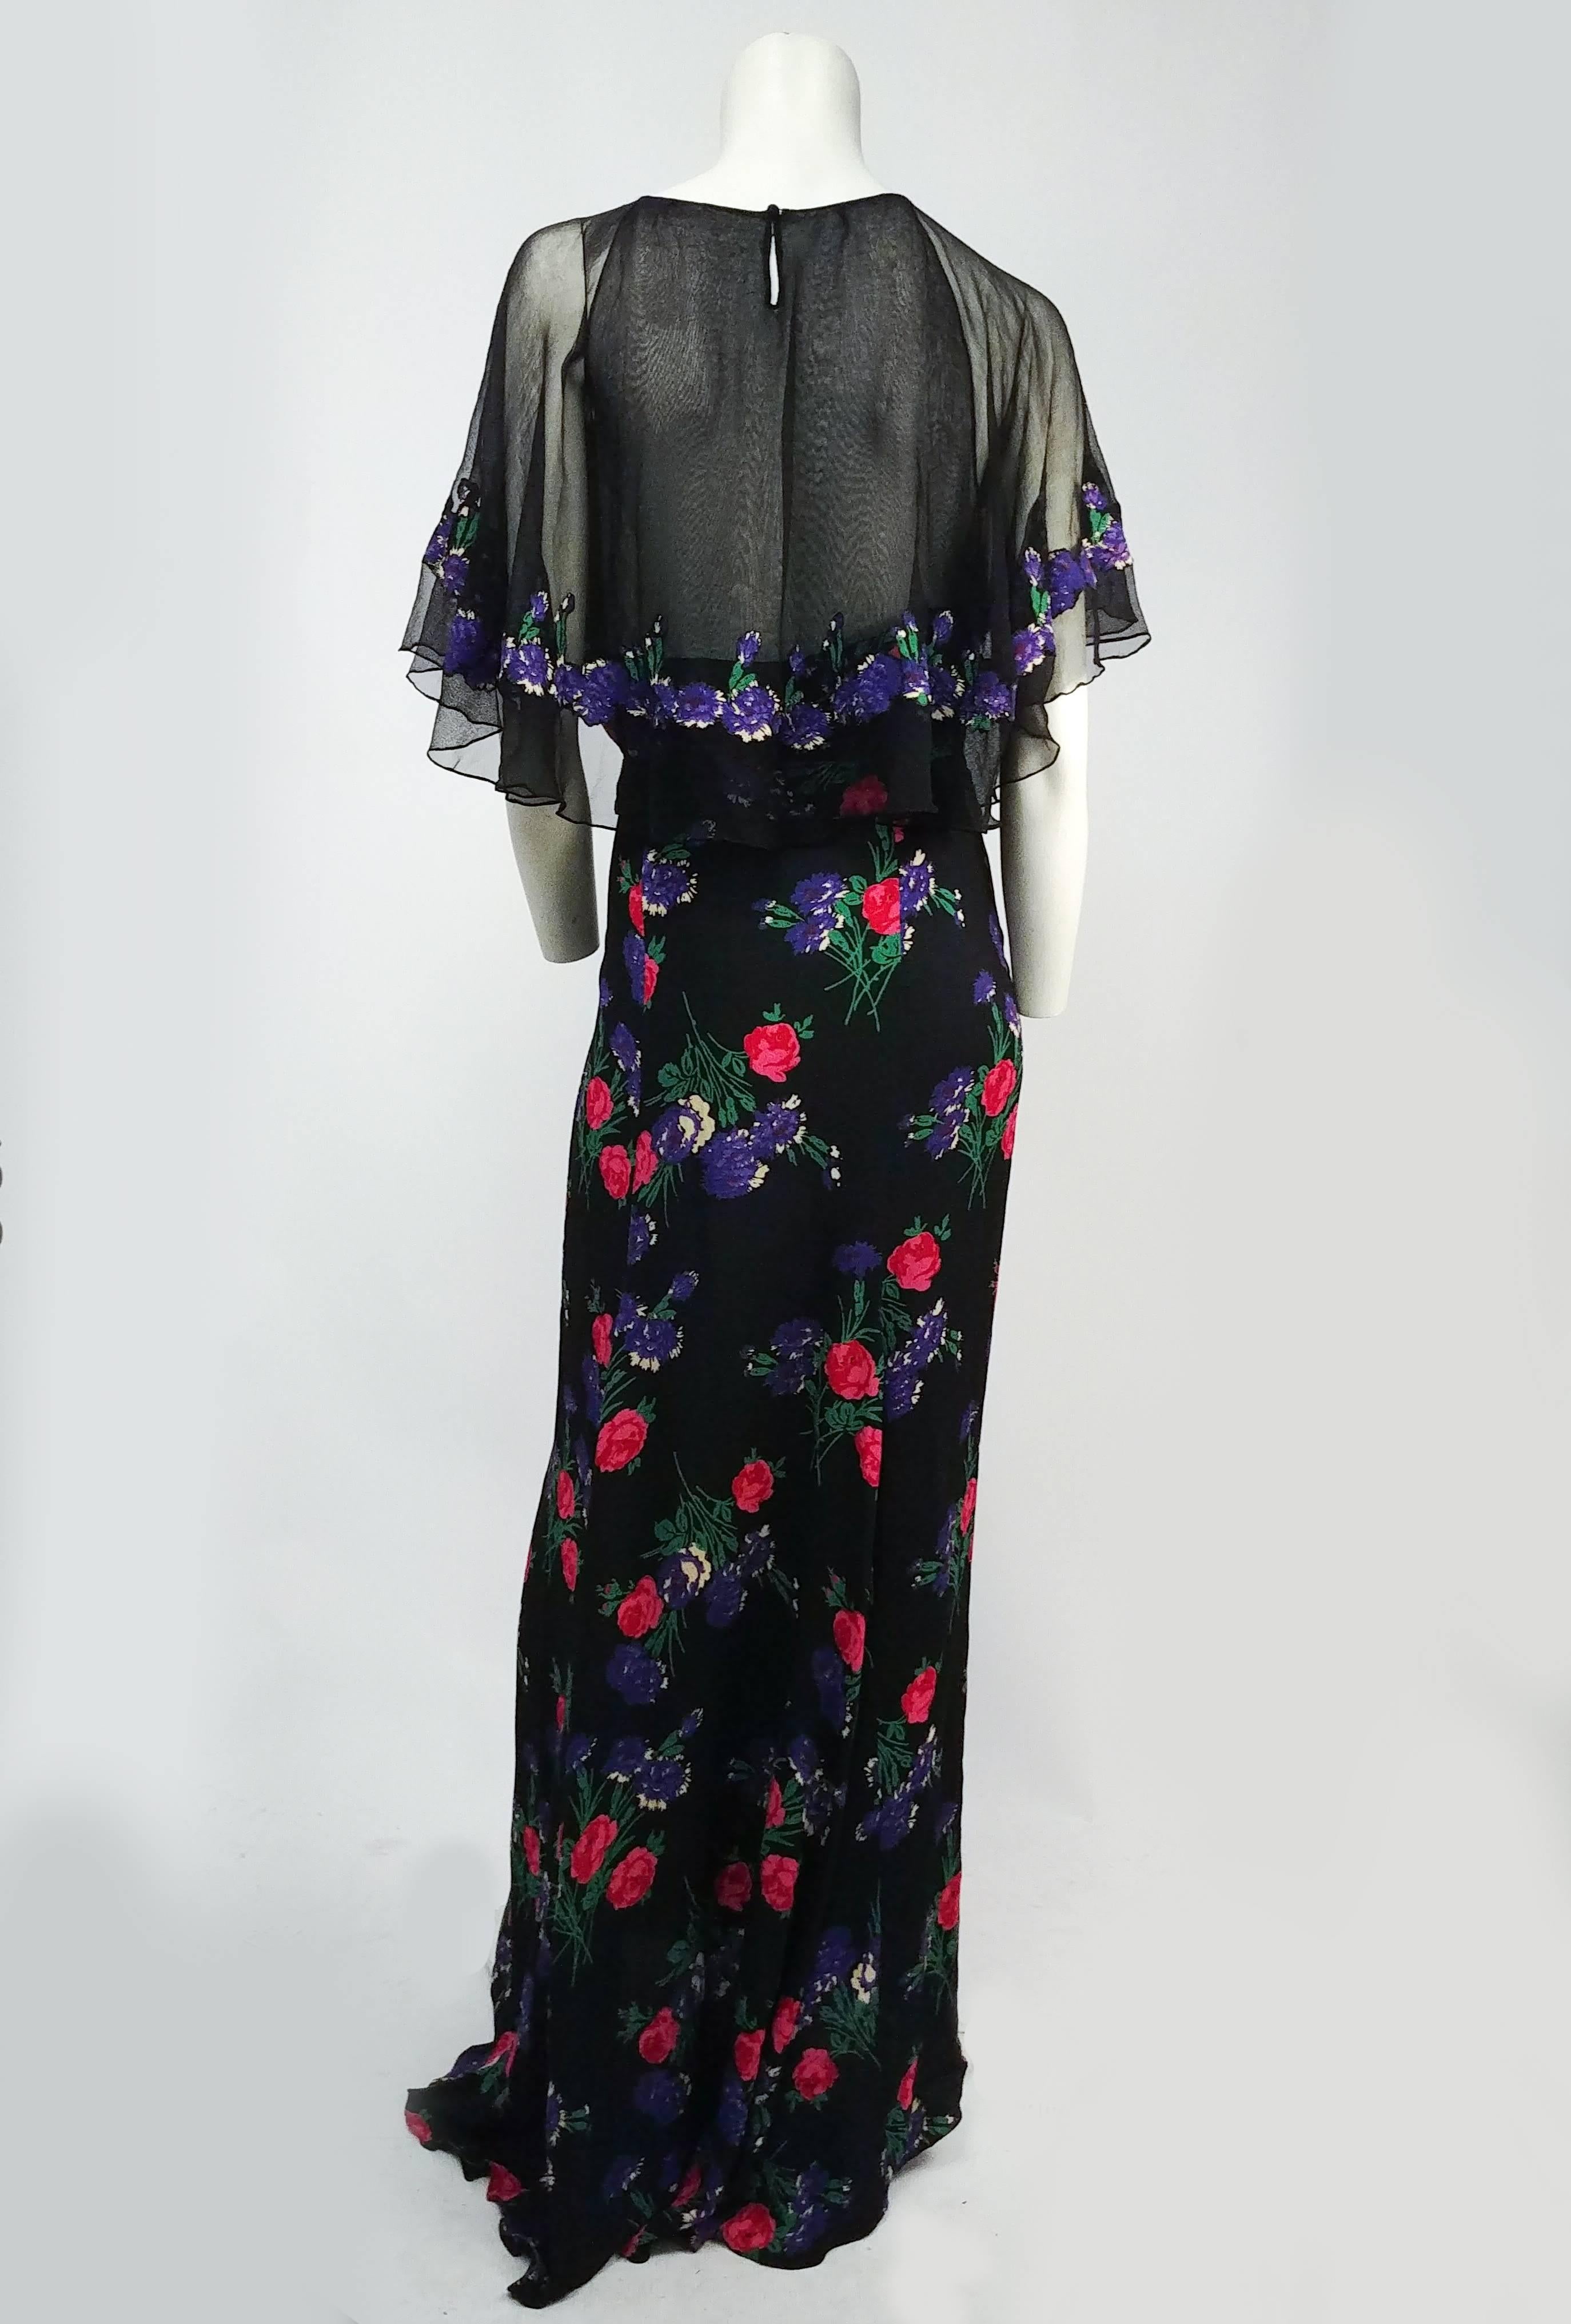 1930s Black Mesh Flower Print Dress In Good Condition For Sale In San Francisco, CA